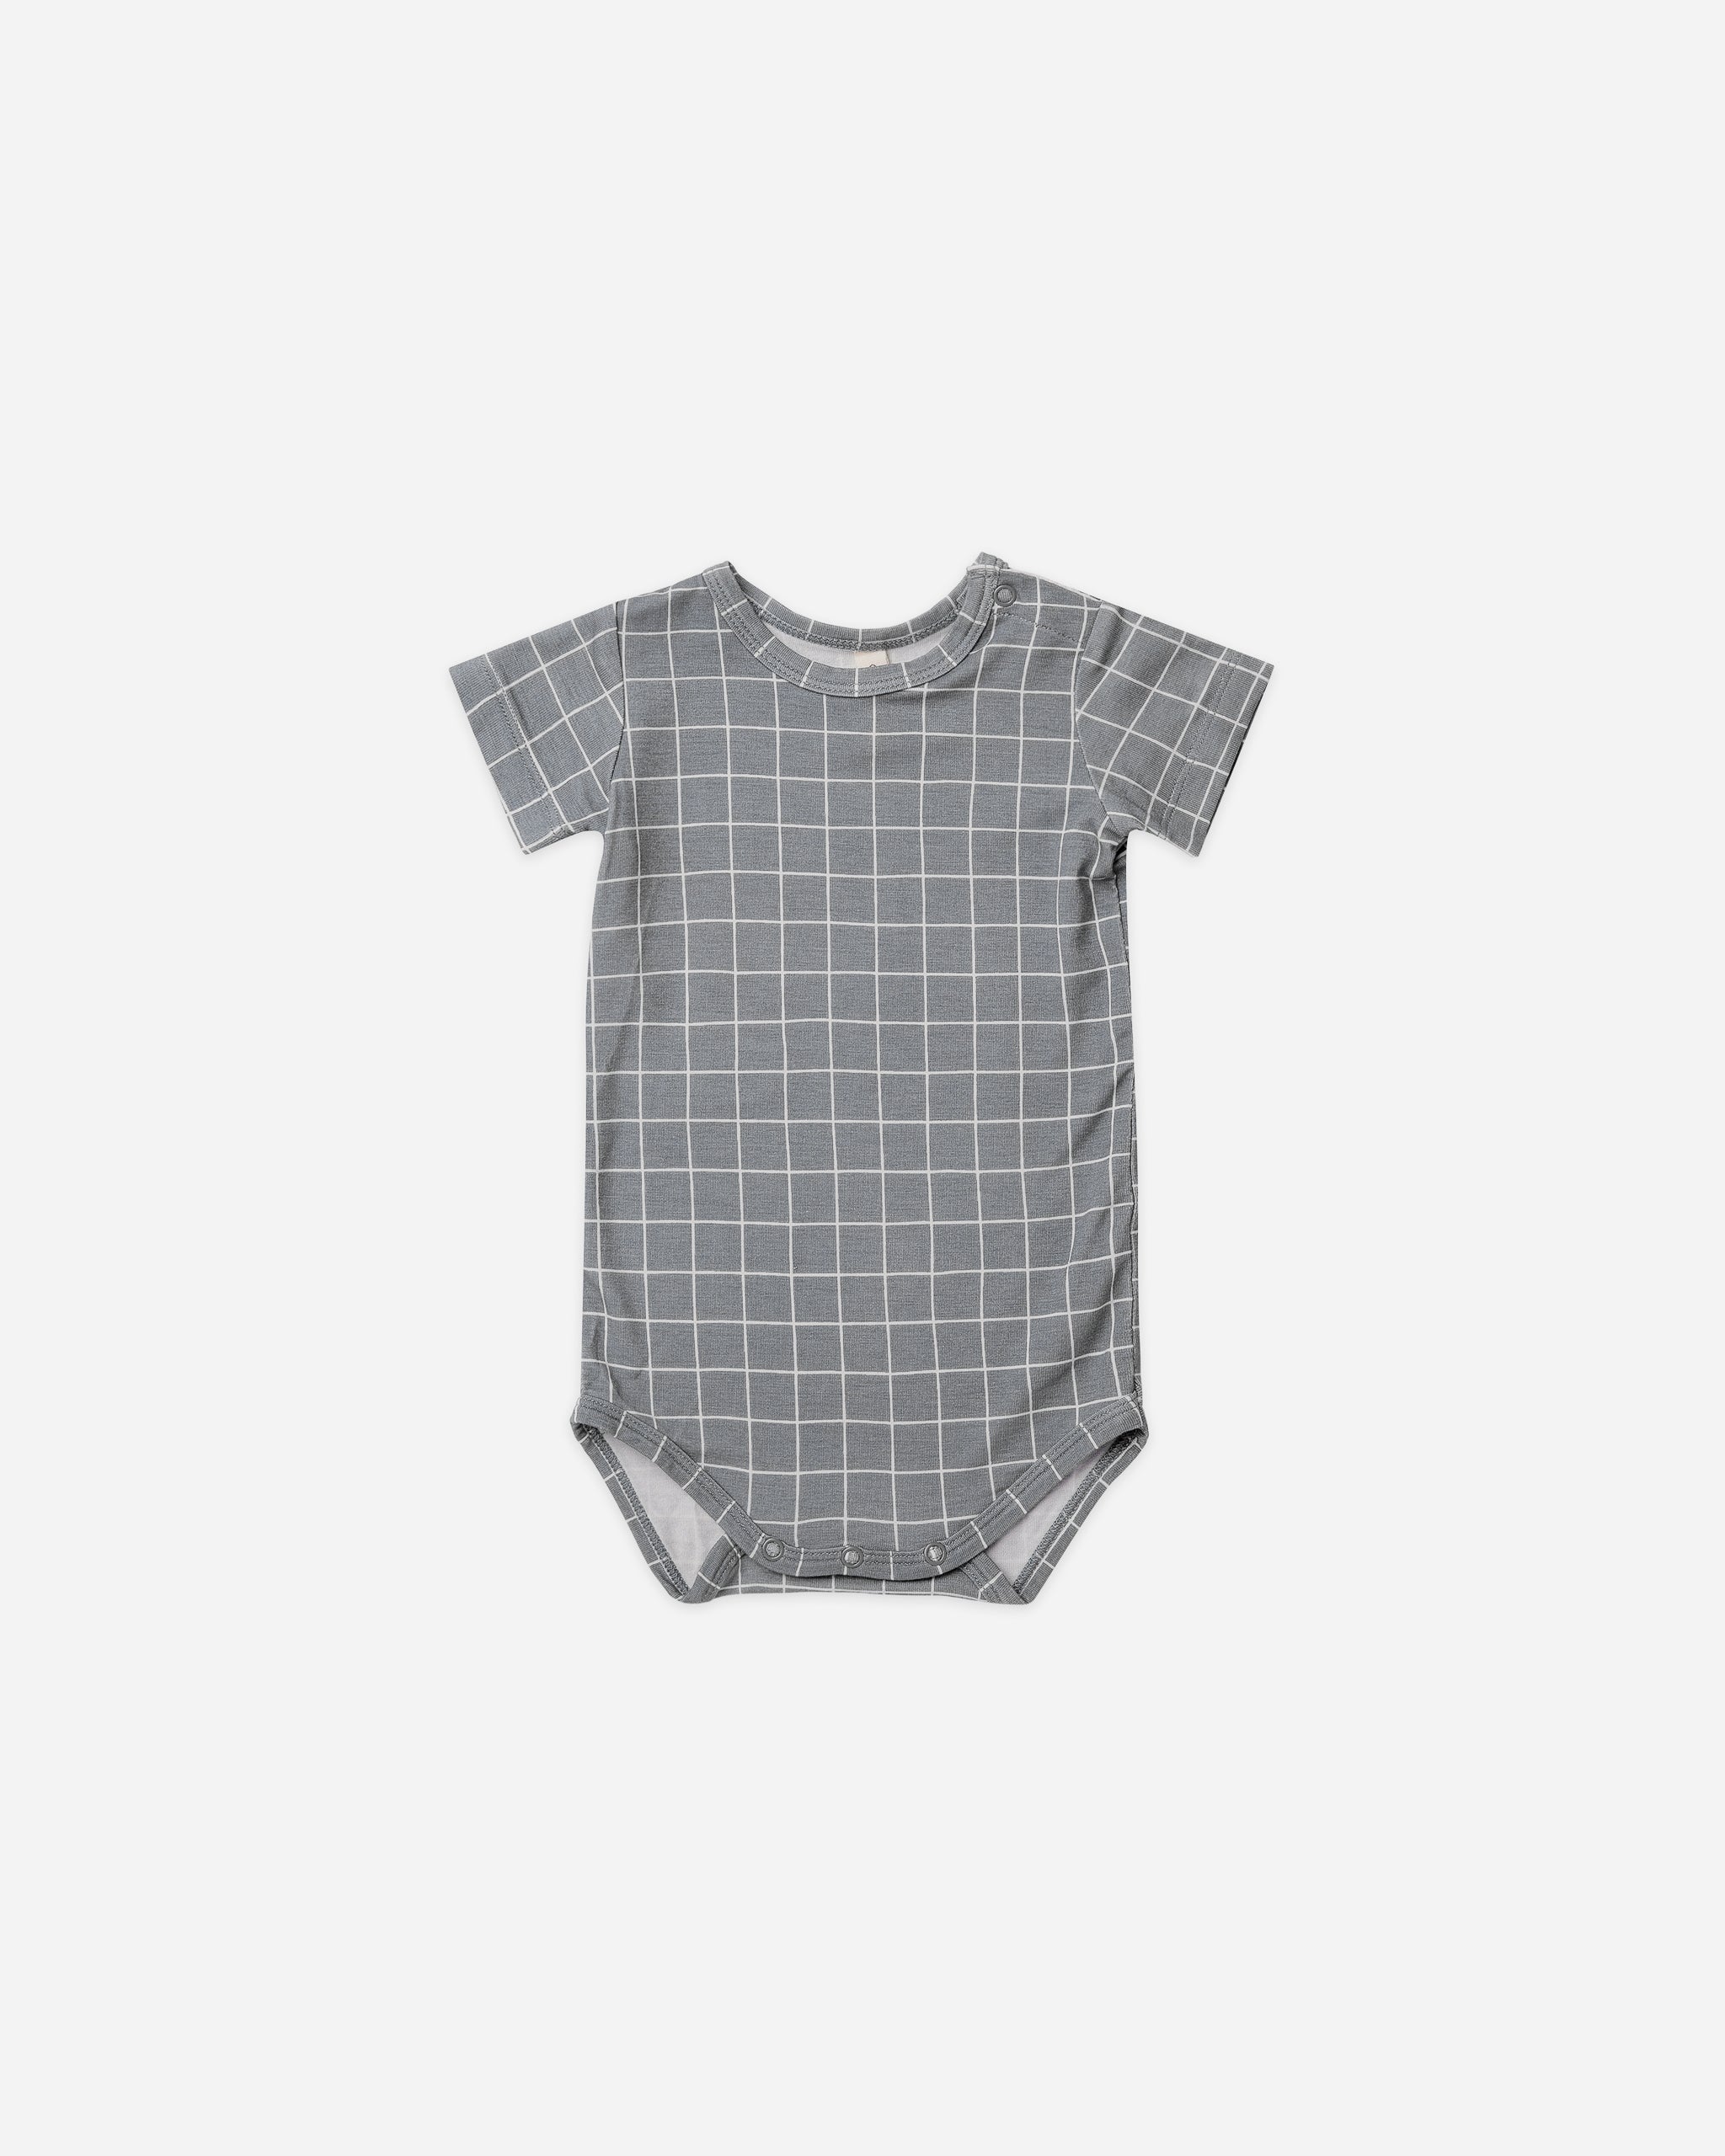 bamboo short sleeve bodysuit | grid - Quincy Mae | Baby Basics | Baby Clothing | Organic Baby Clothes | Modern Baby Boy Clothes |